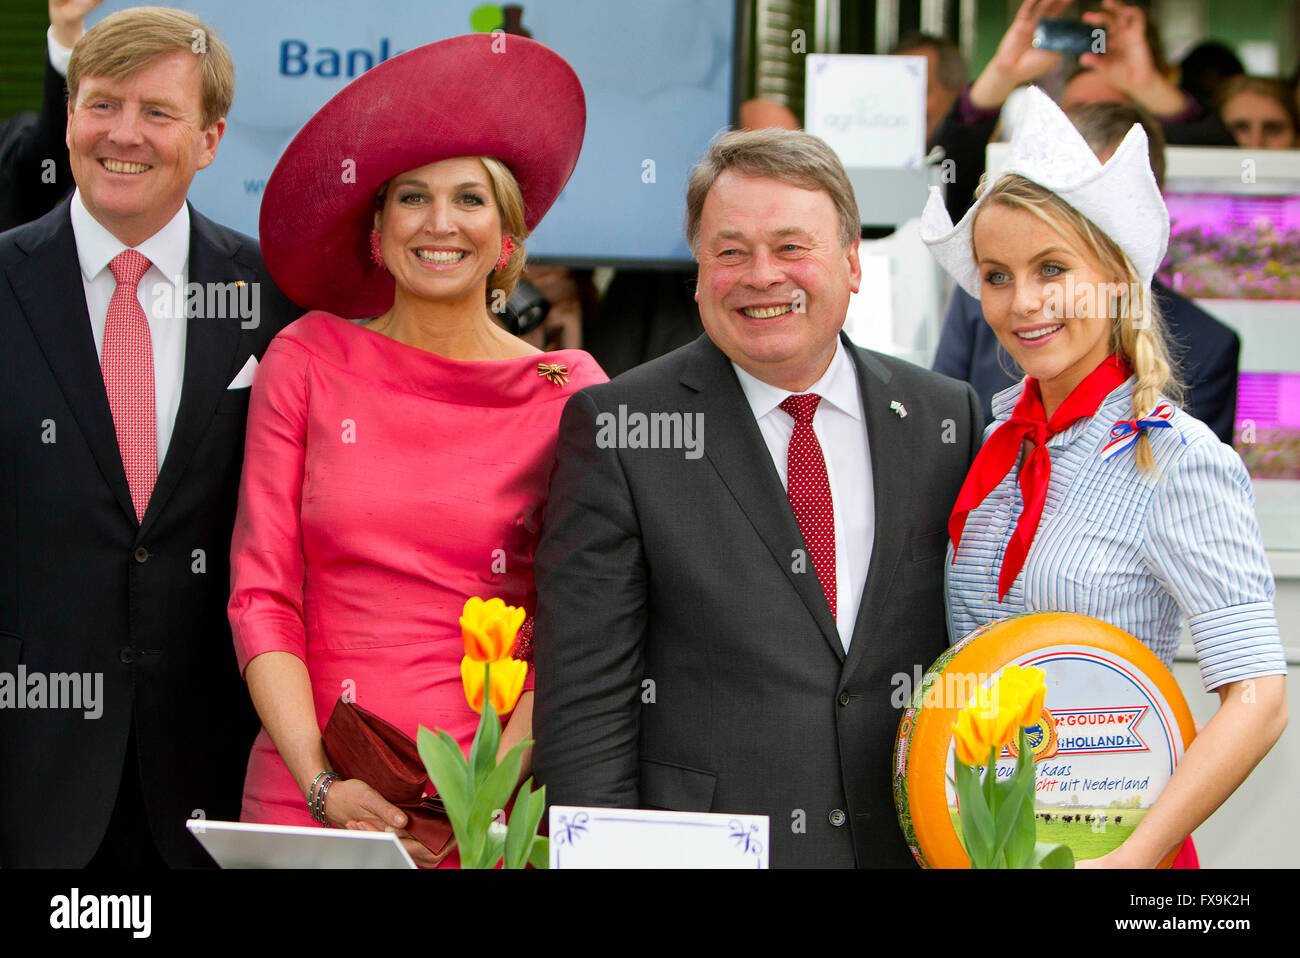 13-04-03-2016 HM King Willem-Alexander and HM Queen Máxima and Frau Antje, visit the Agrifood · Viktualienmarkt Visit to the Alte Pinakothek, Urban Mobility · BMW Group and the Residence of minister-president Seehofer 2 days visit of HM King Willem-Alexander and HM Queen Máxima to Bavaria RPE/Albert Nieboer/Netherlands OUT - NO WIRE SERVICE - Stock Photo